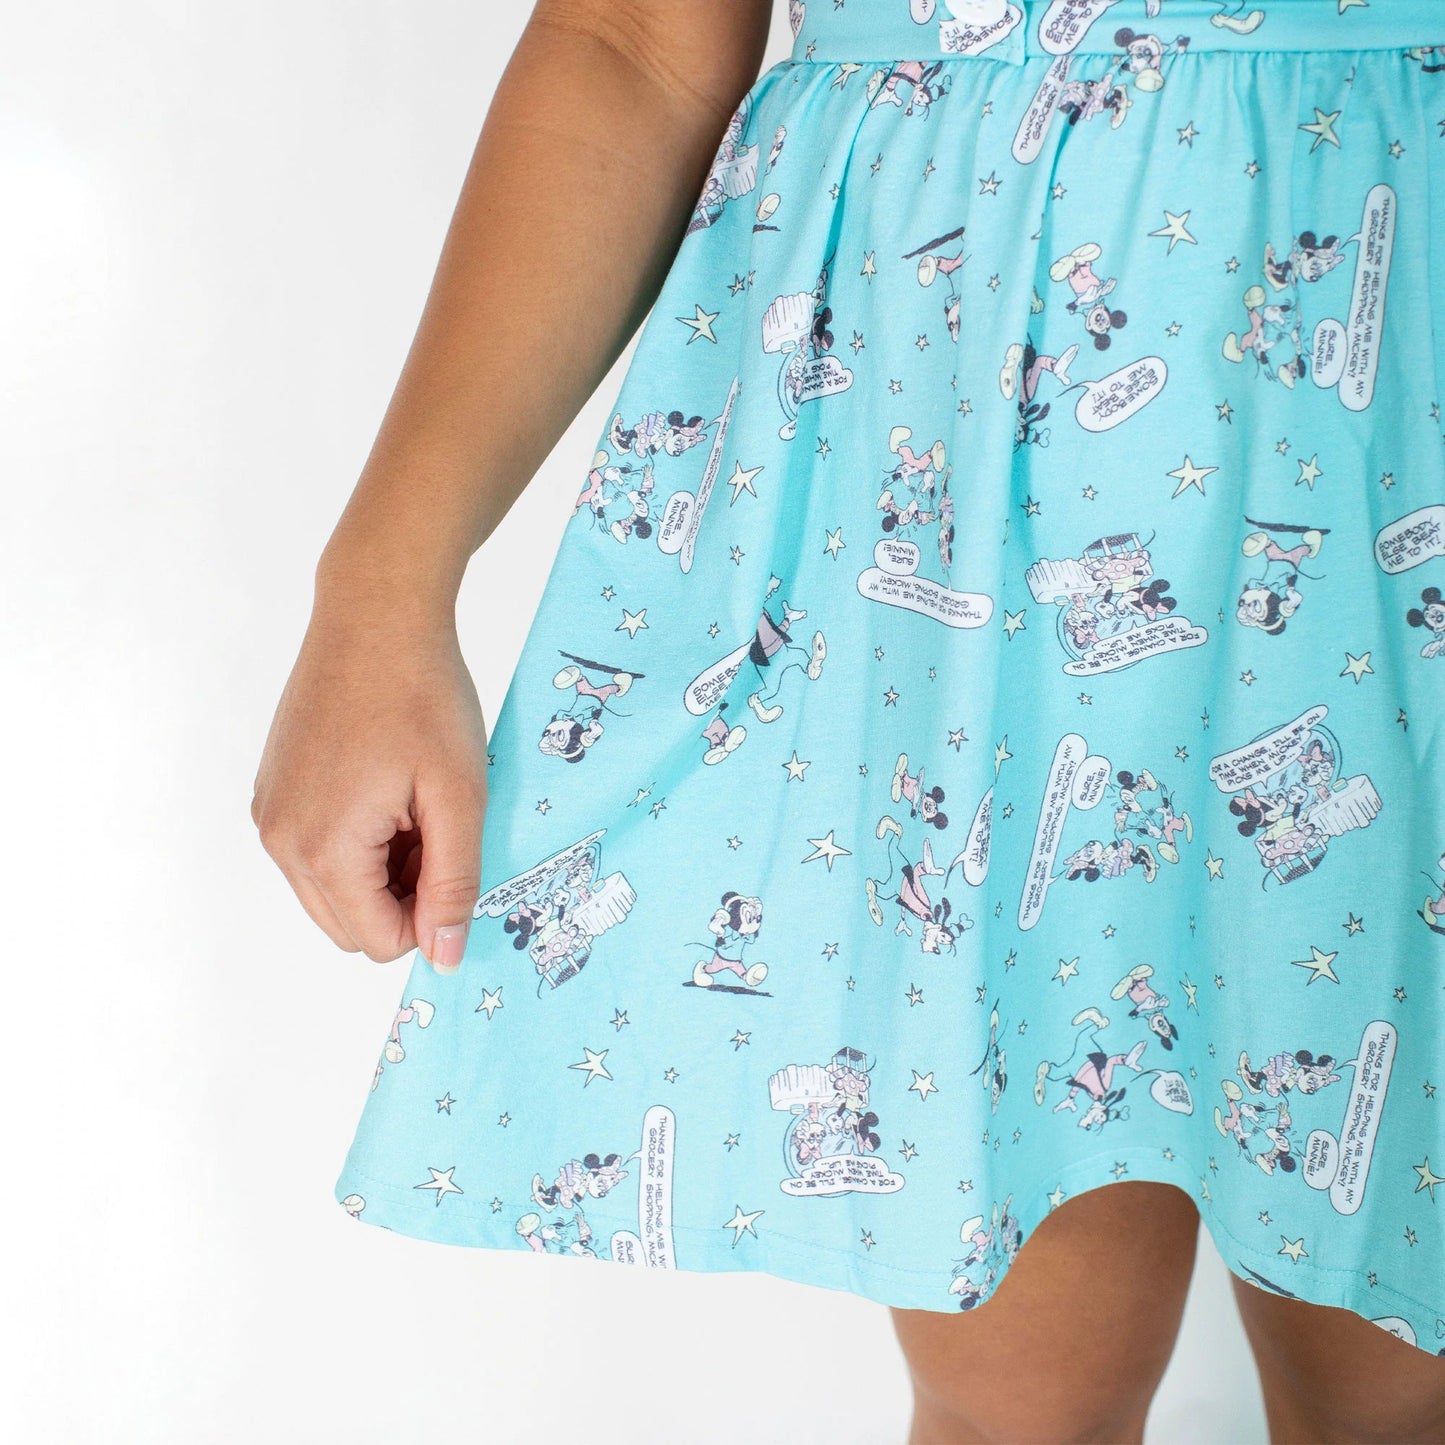 Mickey & Friends Overall Skirt - Rockamilly-Tops-Vintage